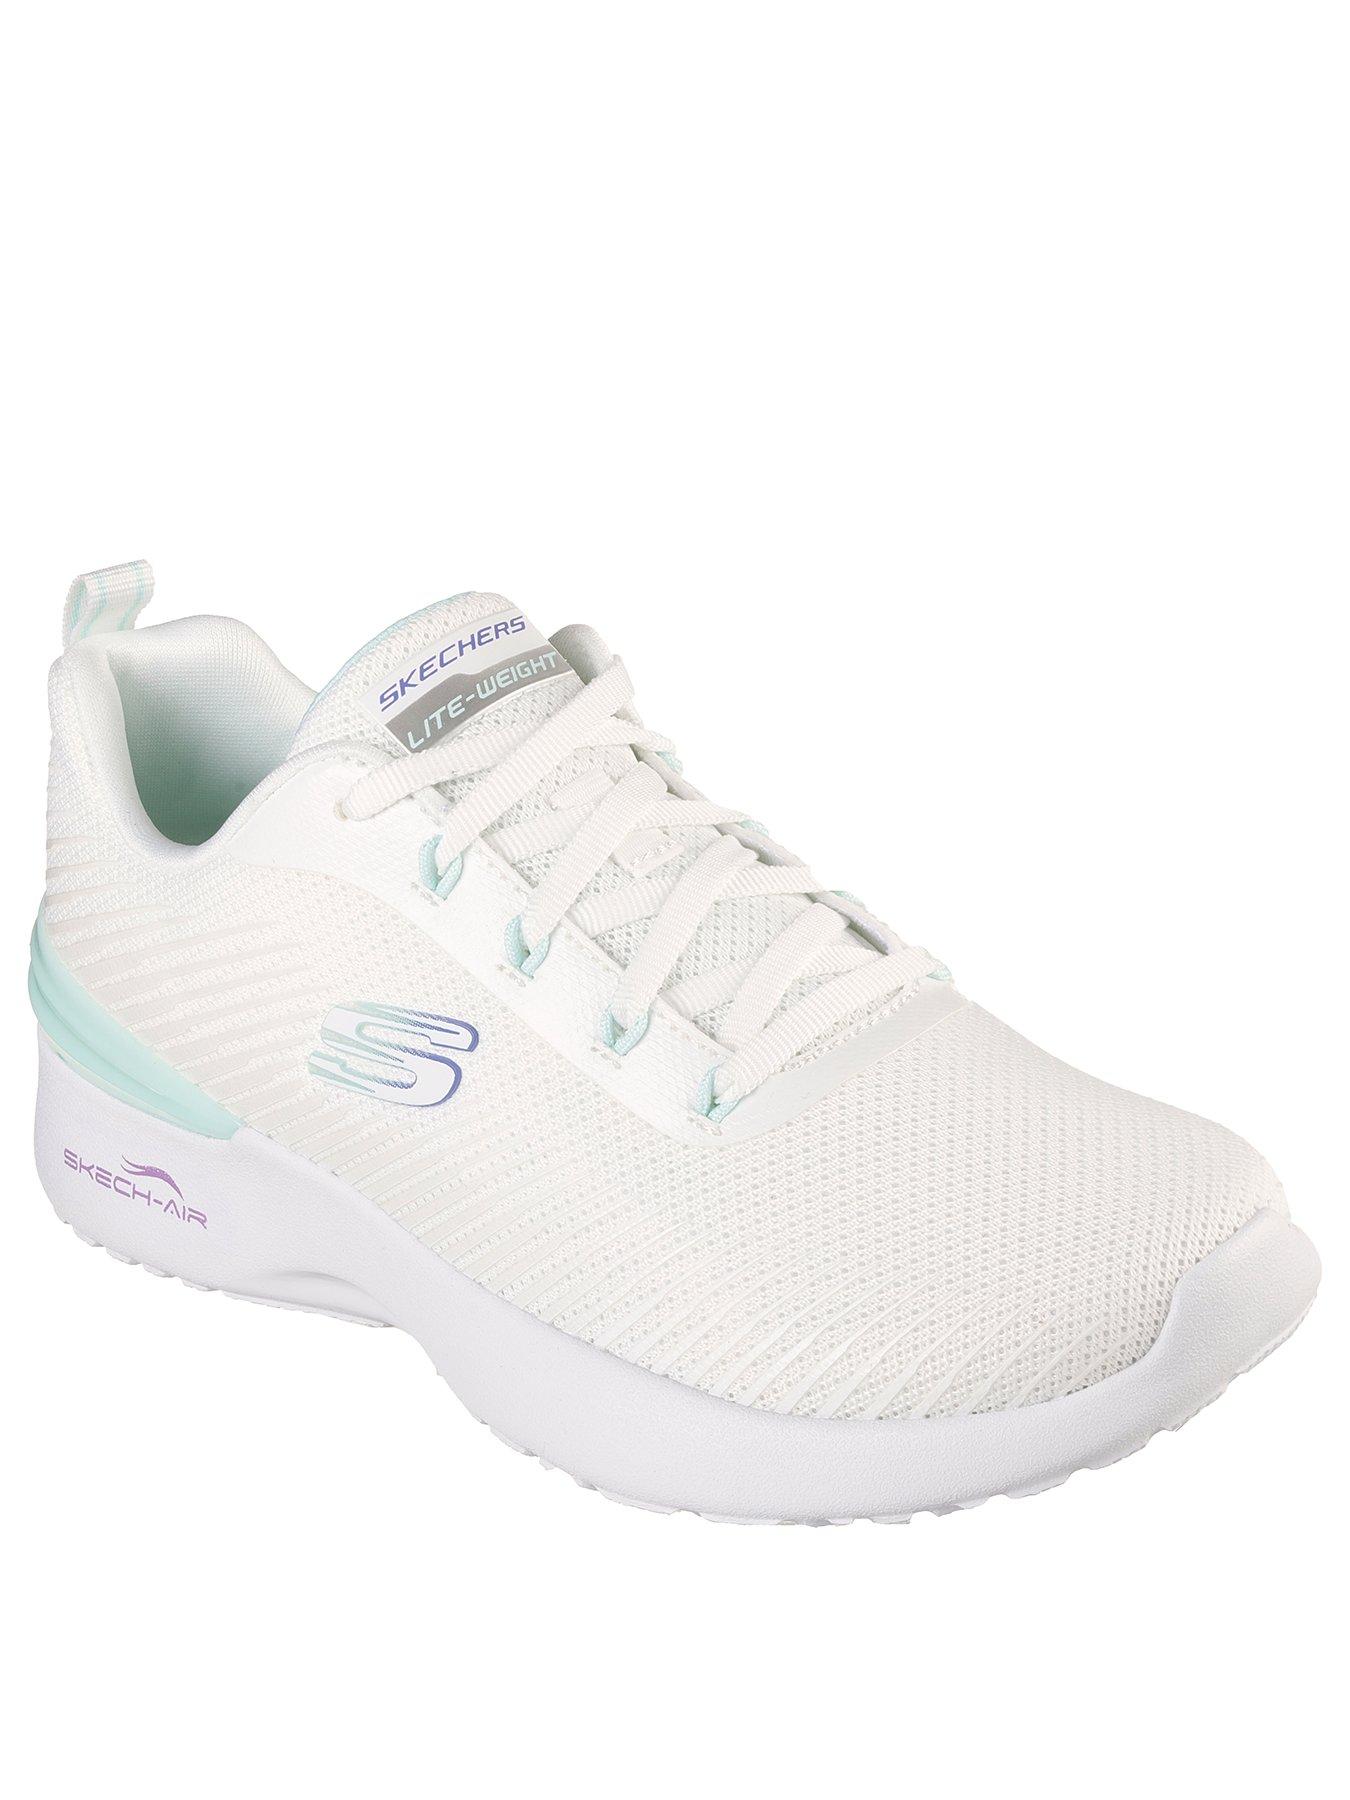 Trainers Skech-air Dynamight Luminosity Trainers